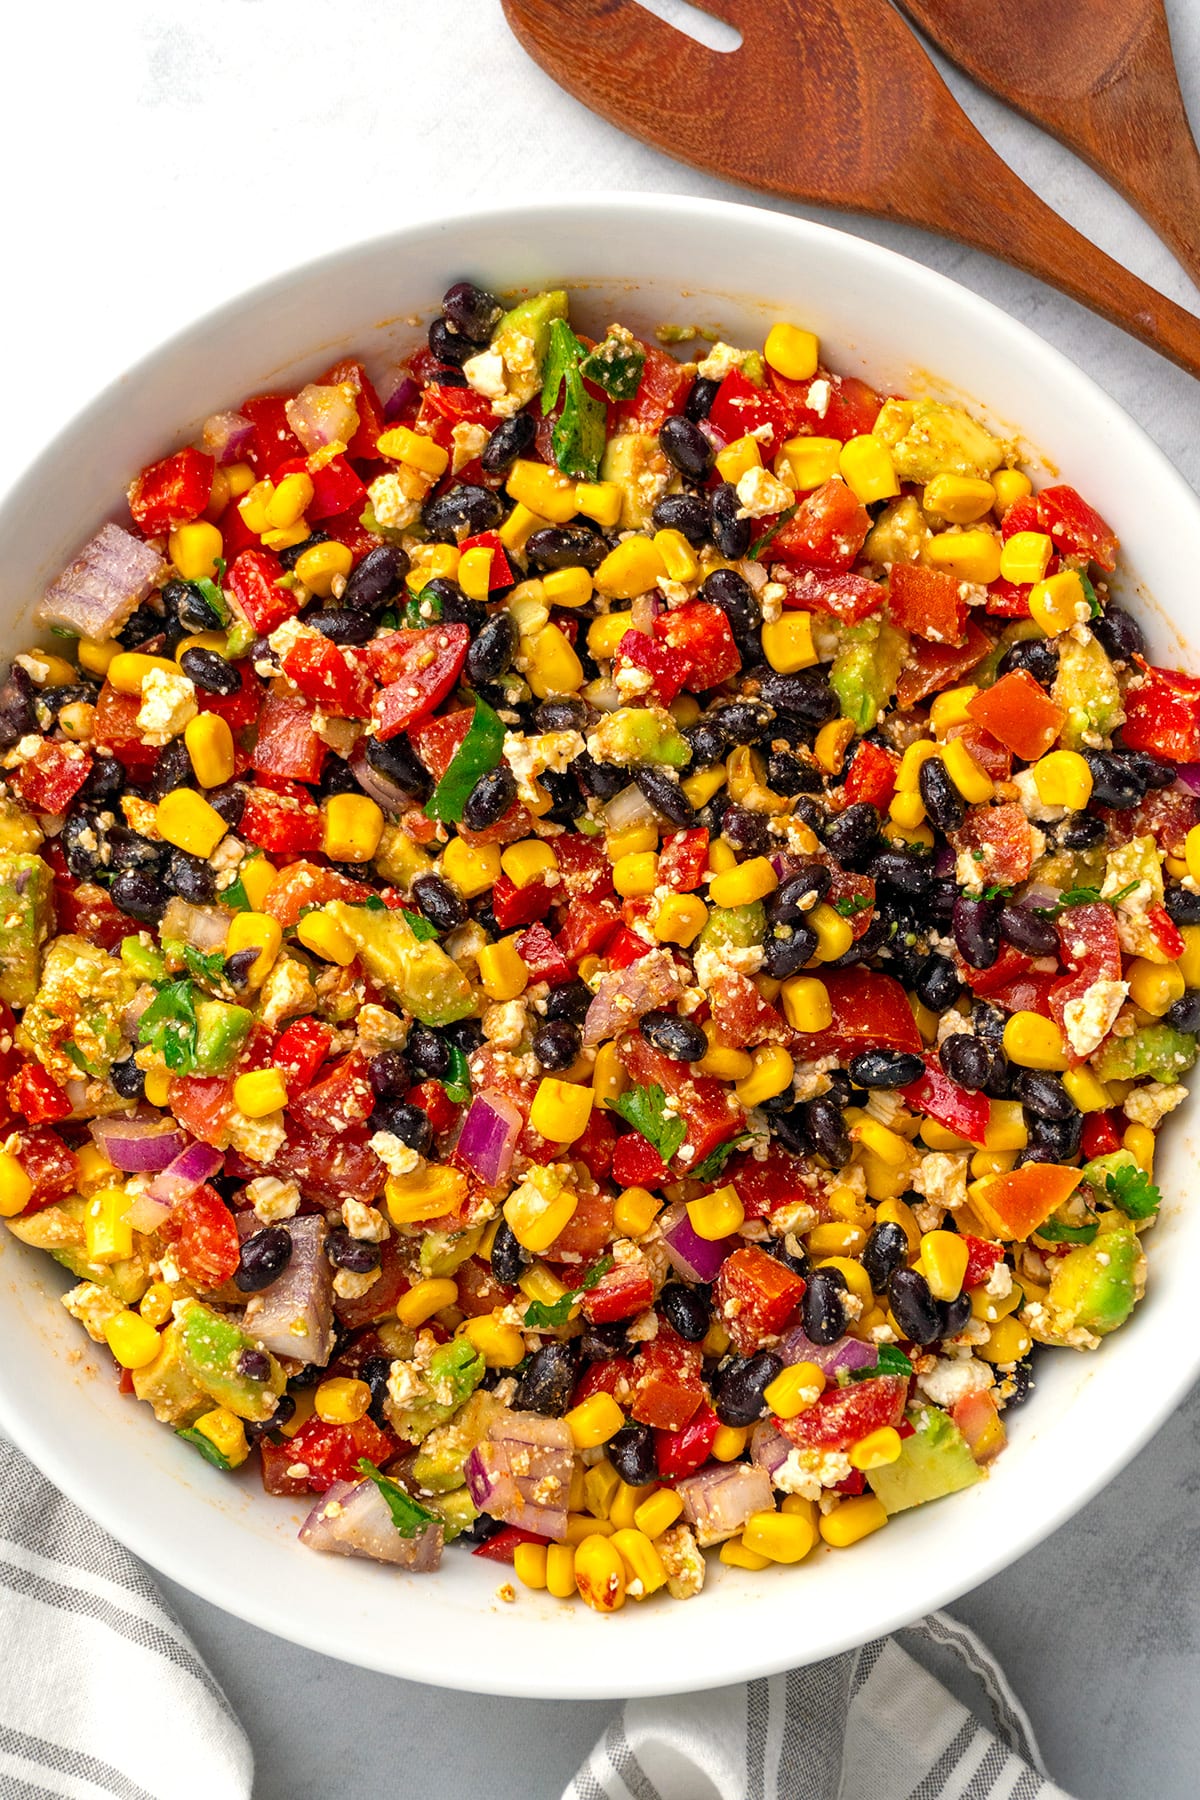 Mexican Salad With Black Beans, Corn & Avocado